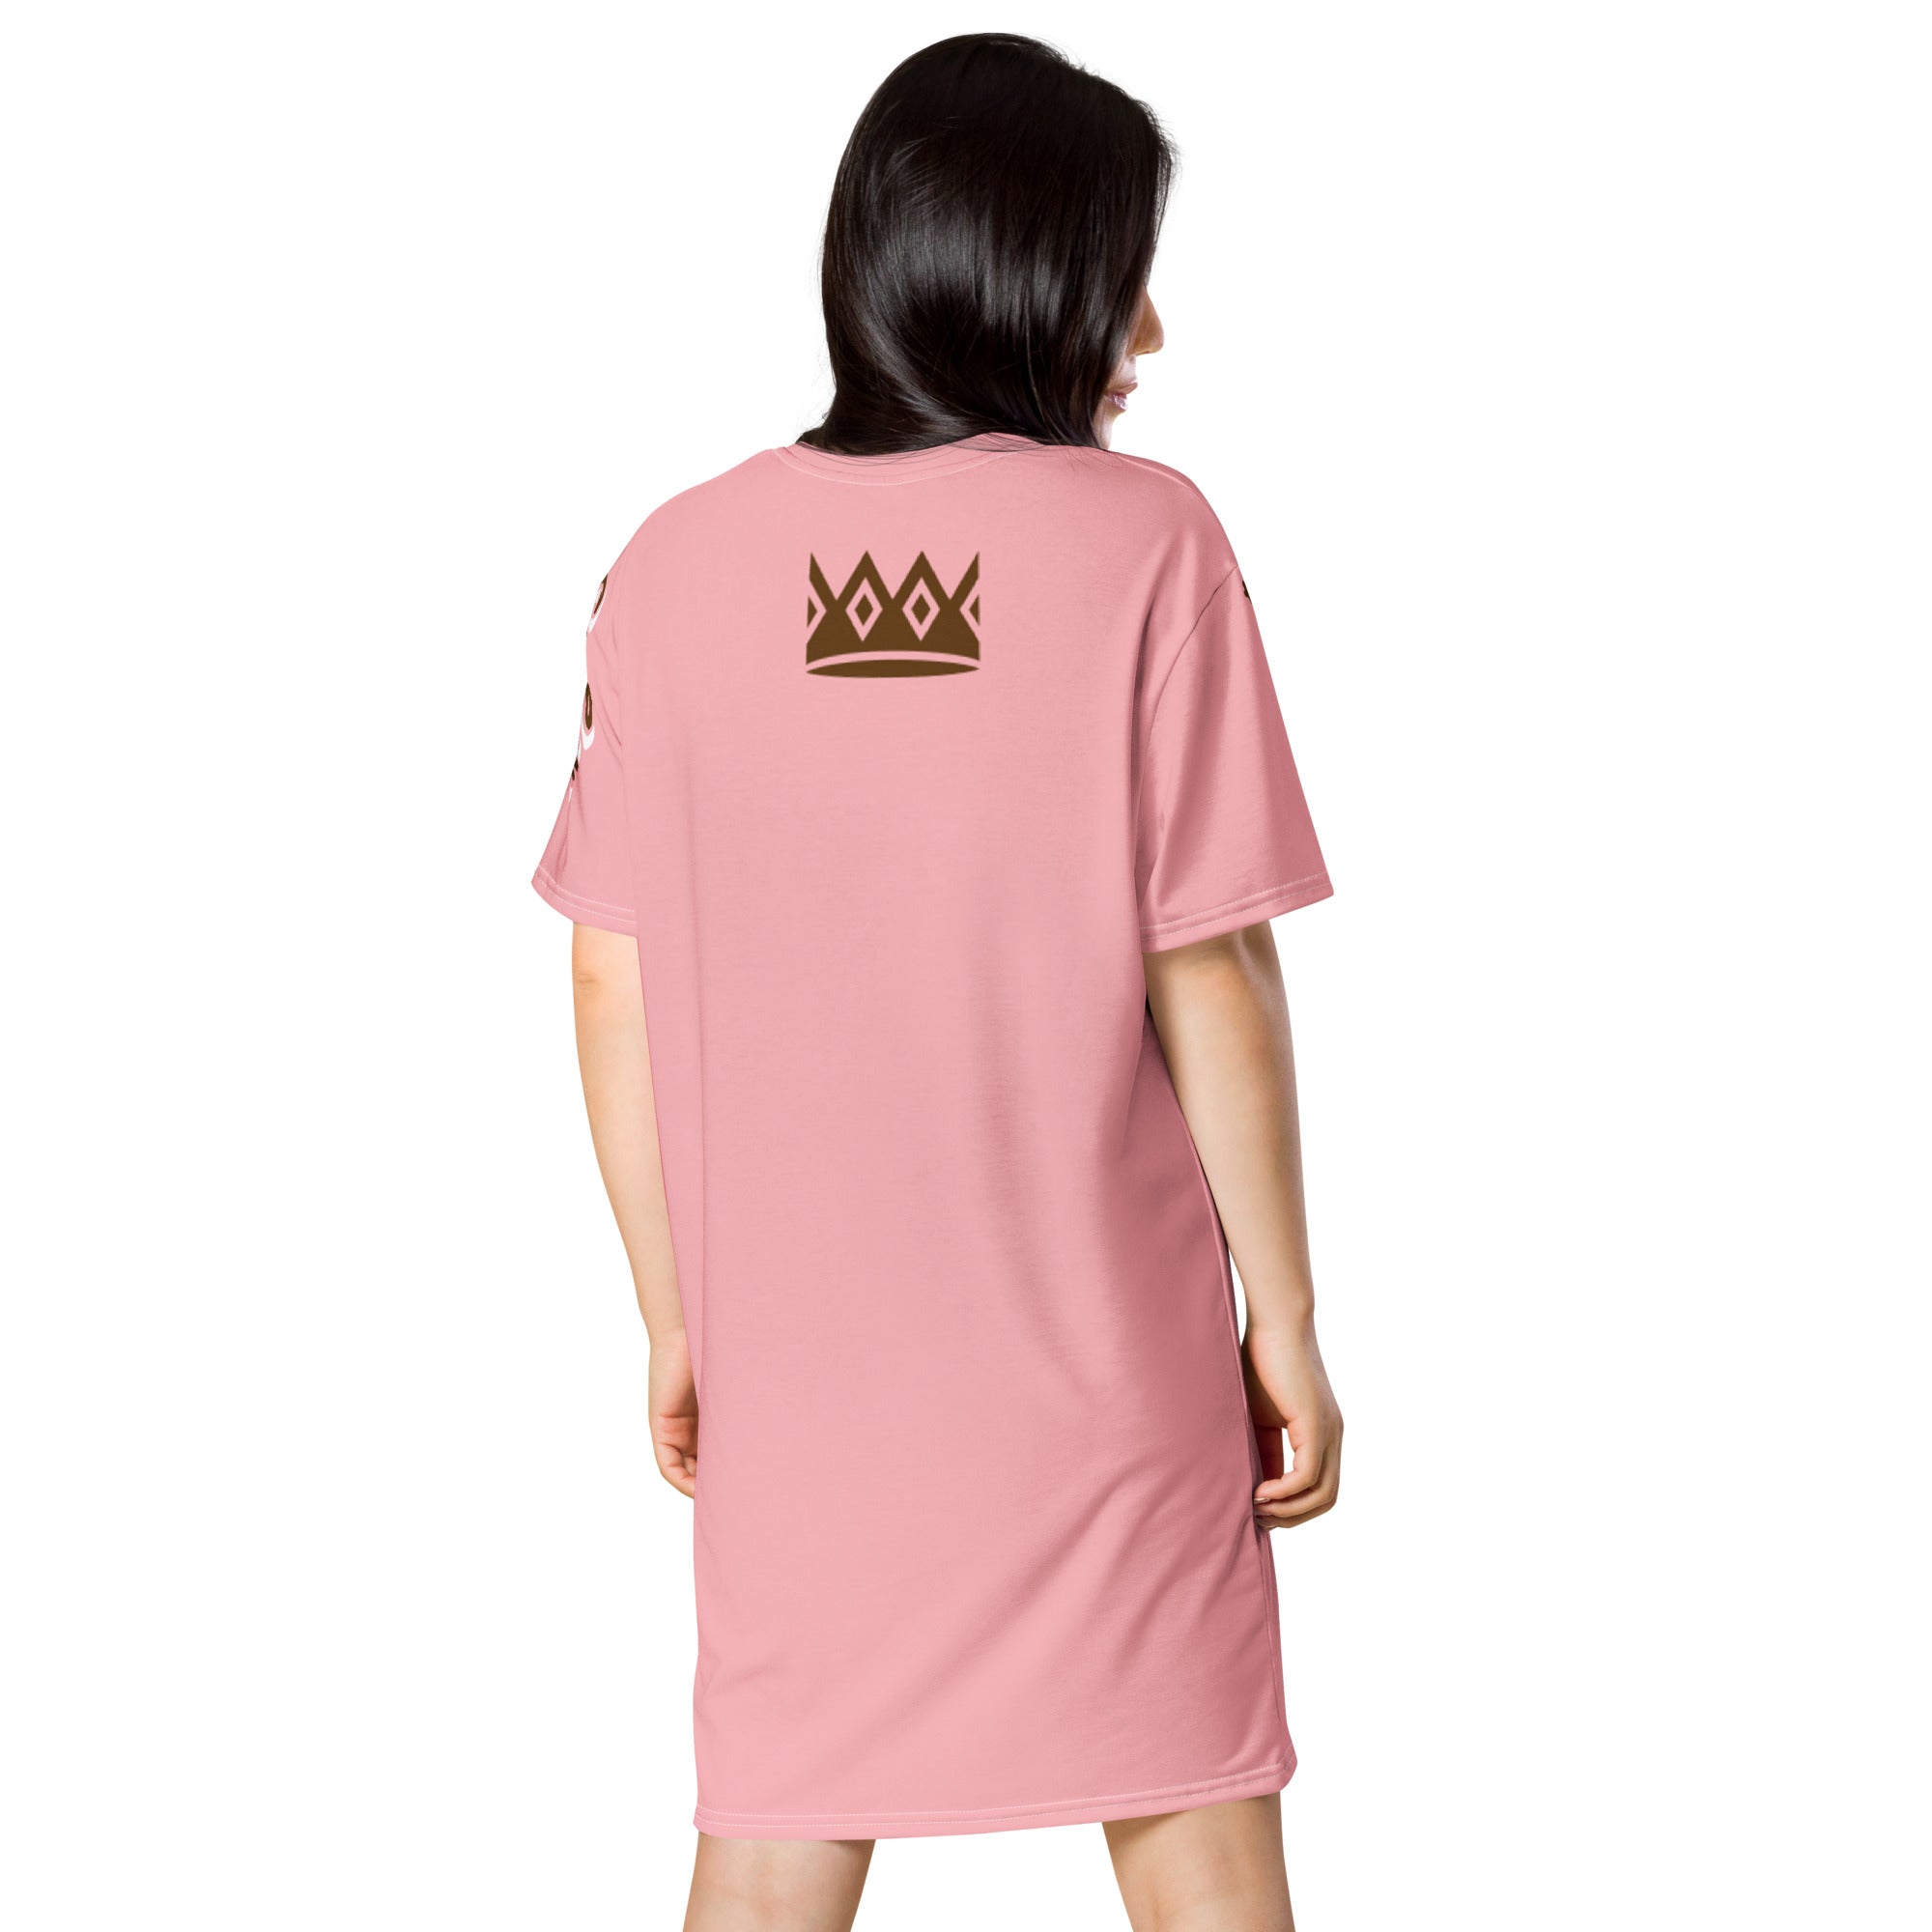 Brown and Pink Lips t-shirt dress